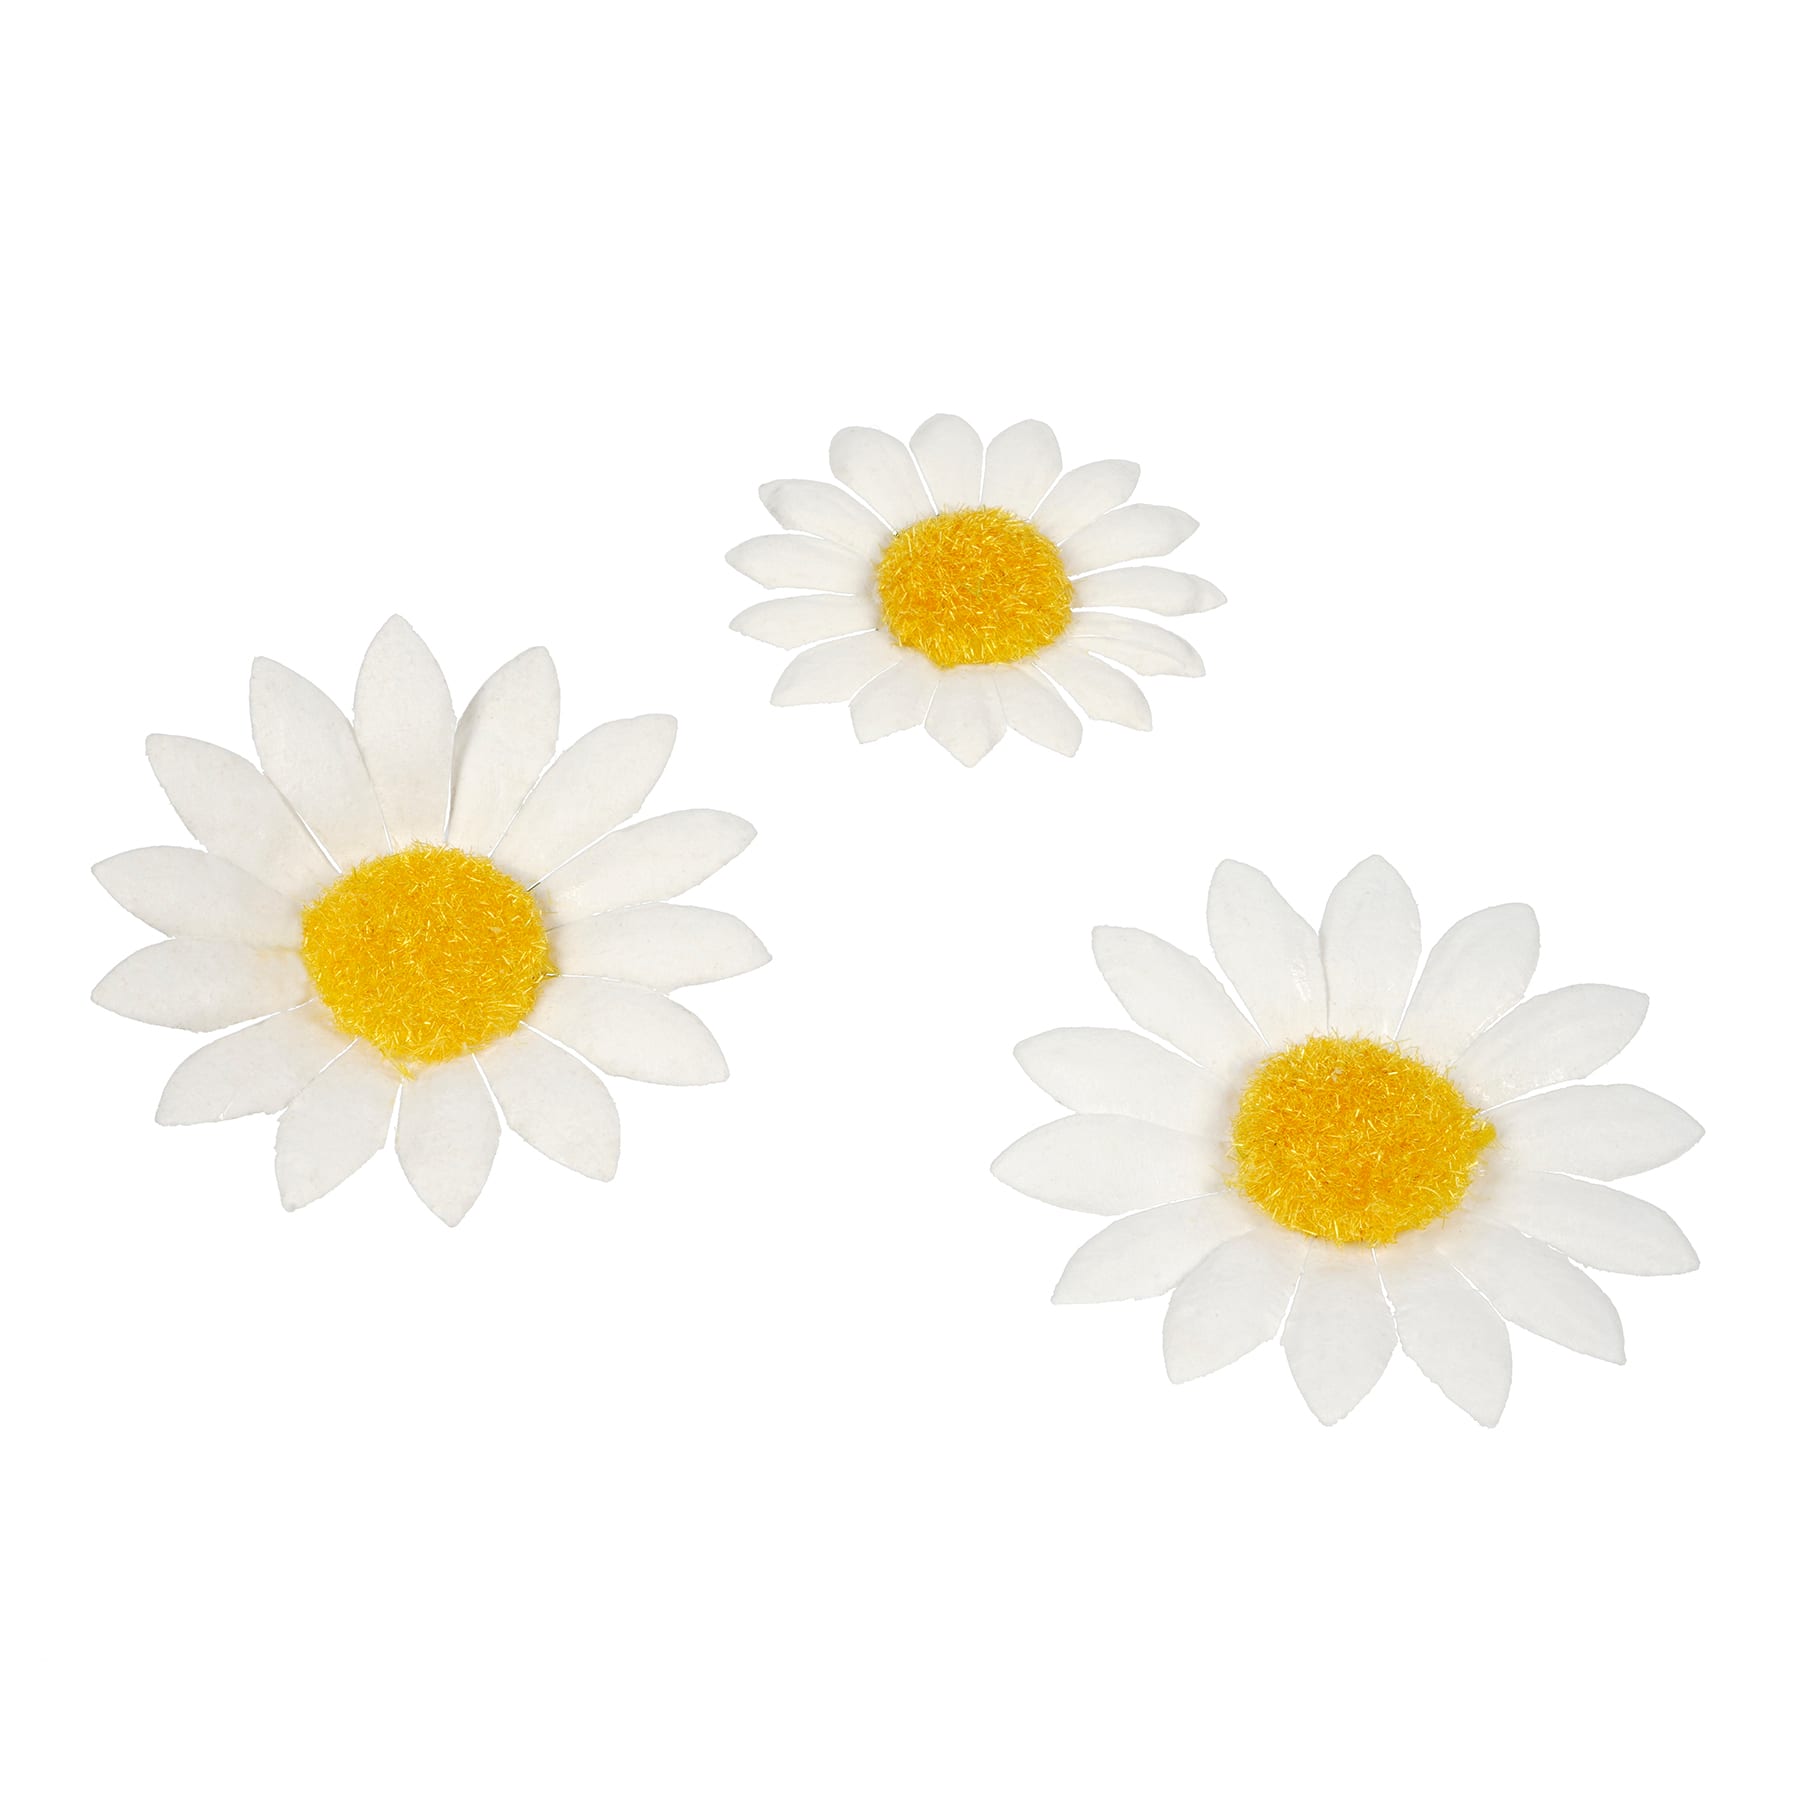 12 Packs: 36 ct. (432 total) White Daisy Paper Flowers by Recollections&#x2122;